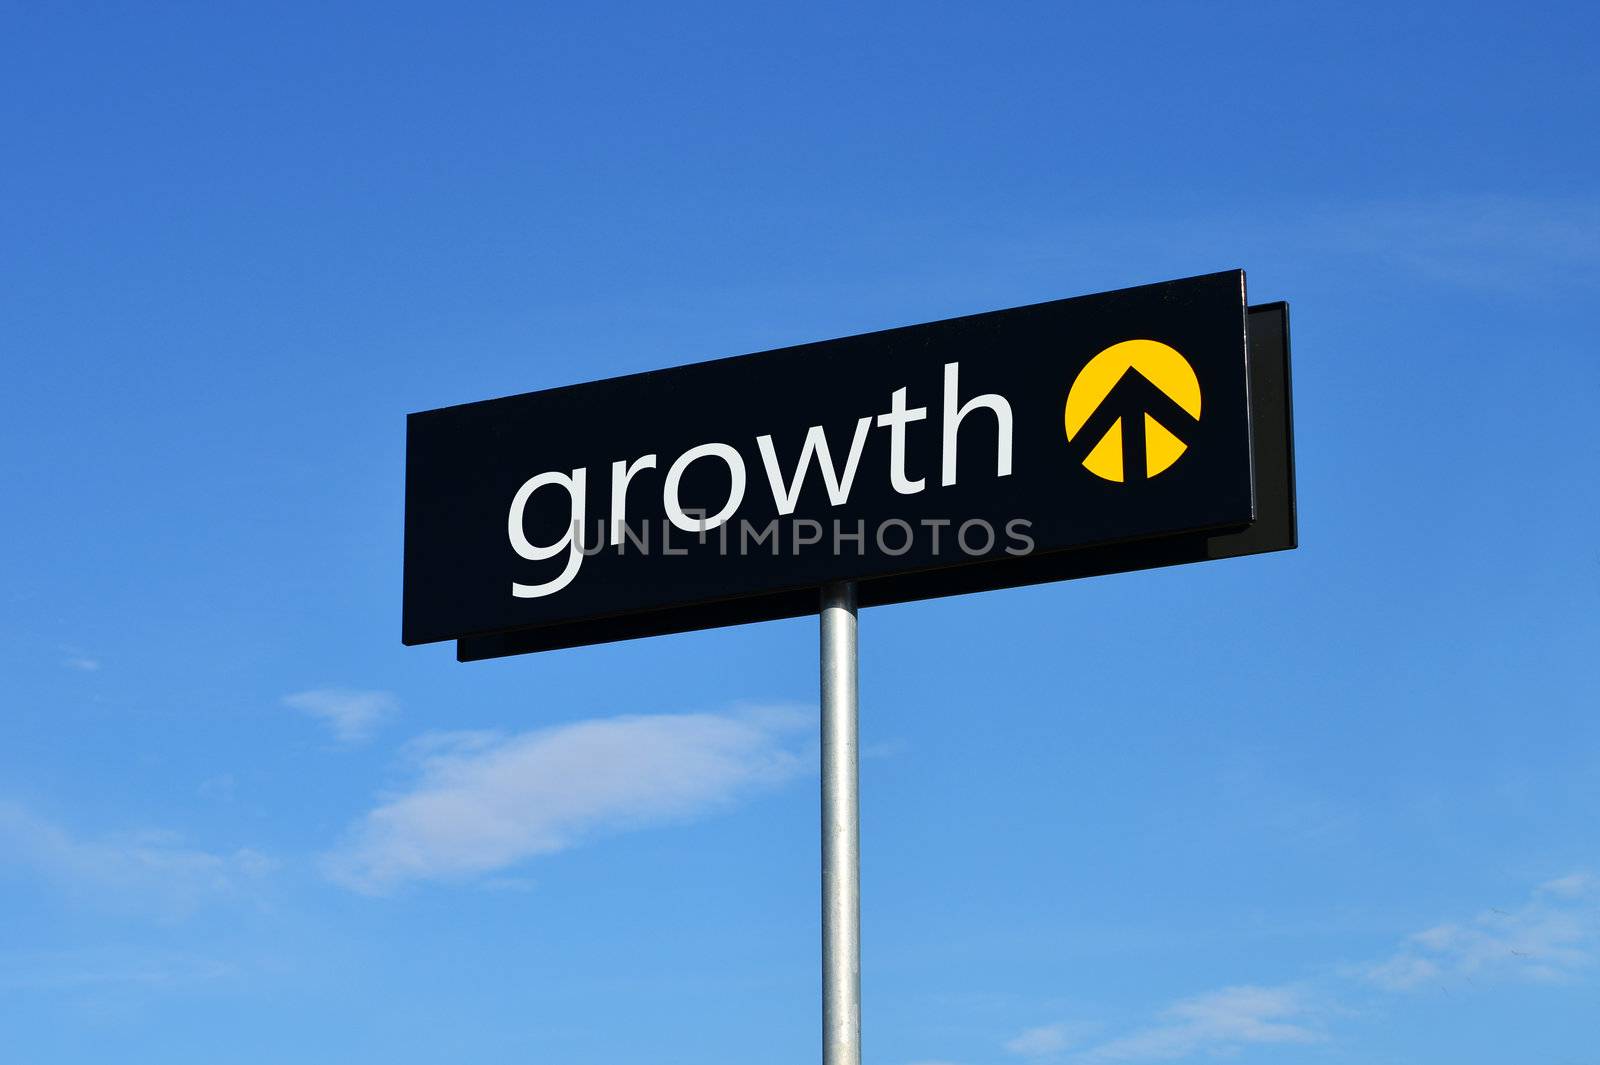 "Growth" street sign by artofphoto